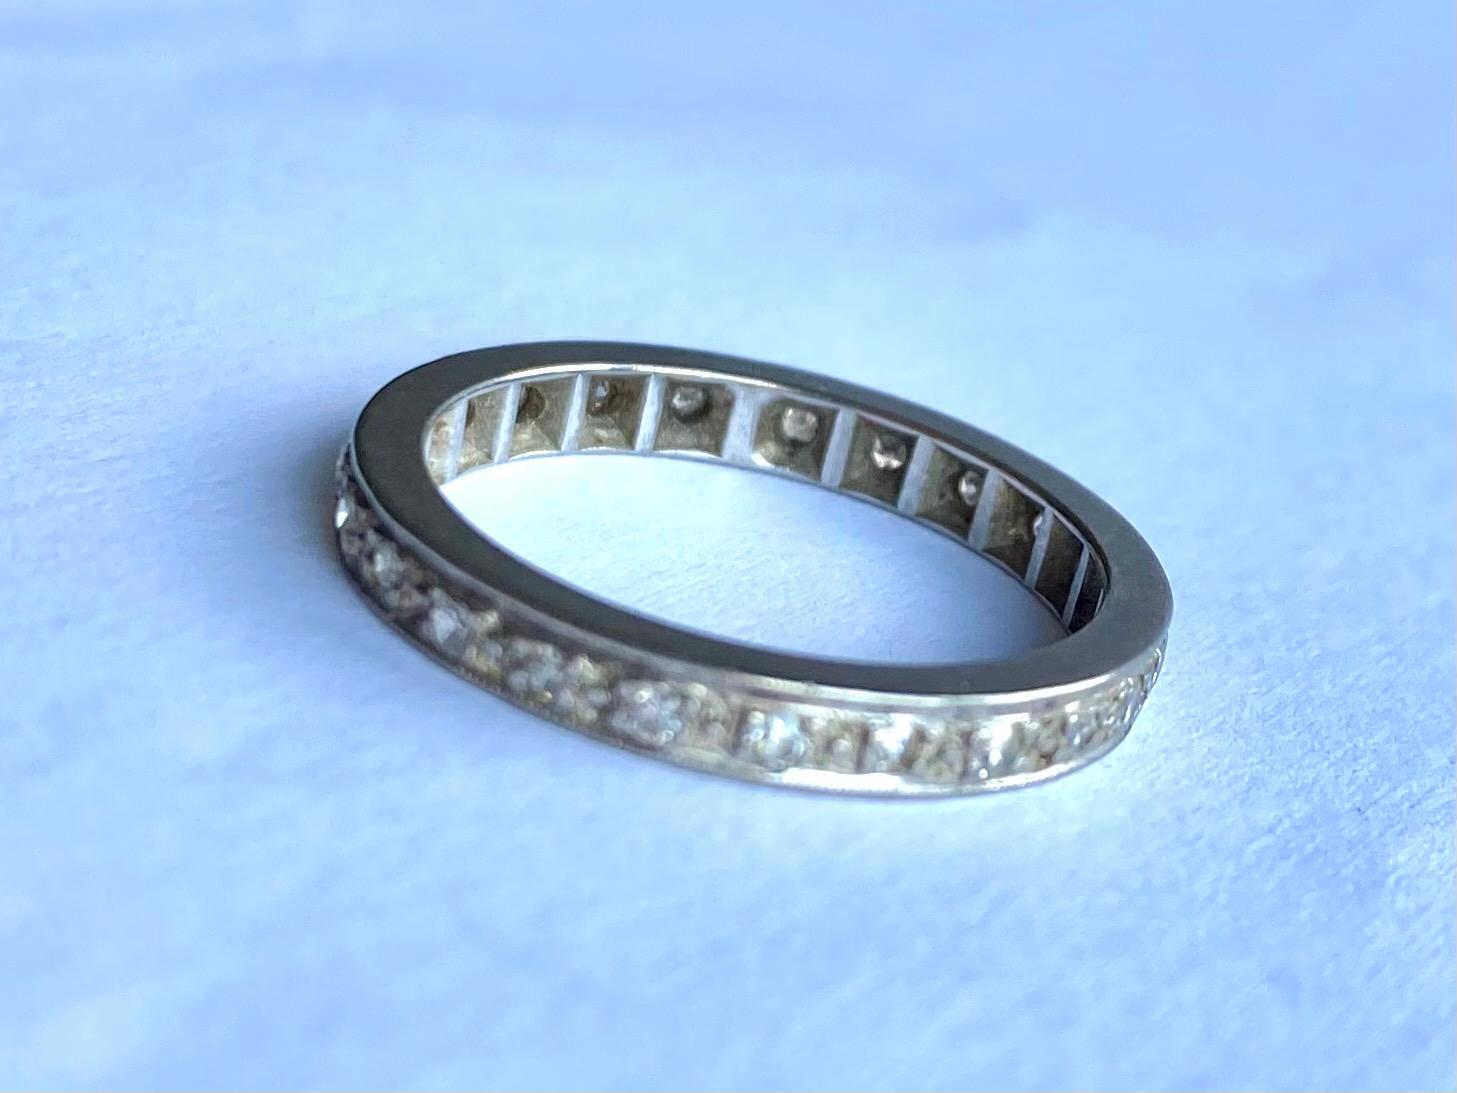 This shimmering eternity band holds diamonds which total approx 45pts and have the most wonderful sparkle. The diamonds are set within the band which is modelled in 18carat white gold. 

Ring Size: L 1/2 or 6 
Band Width: 2.5mm

Weight: 2.9g